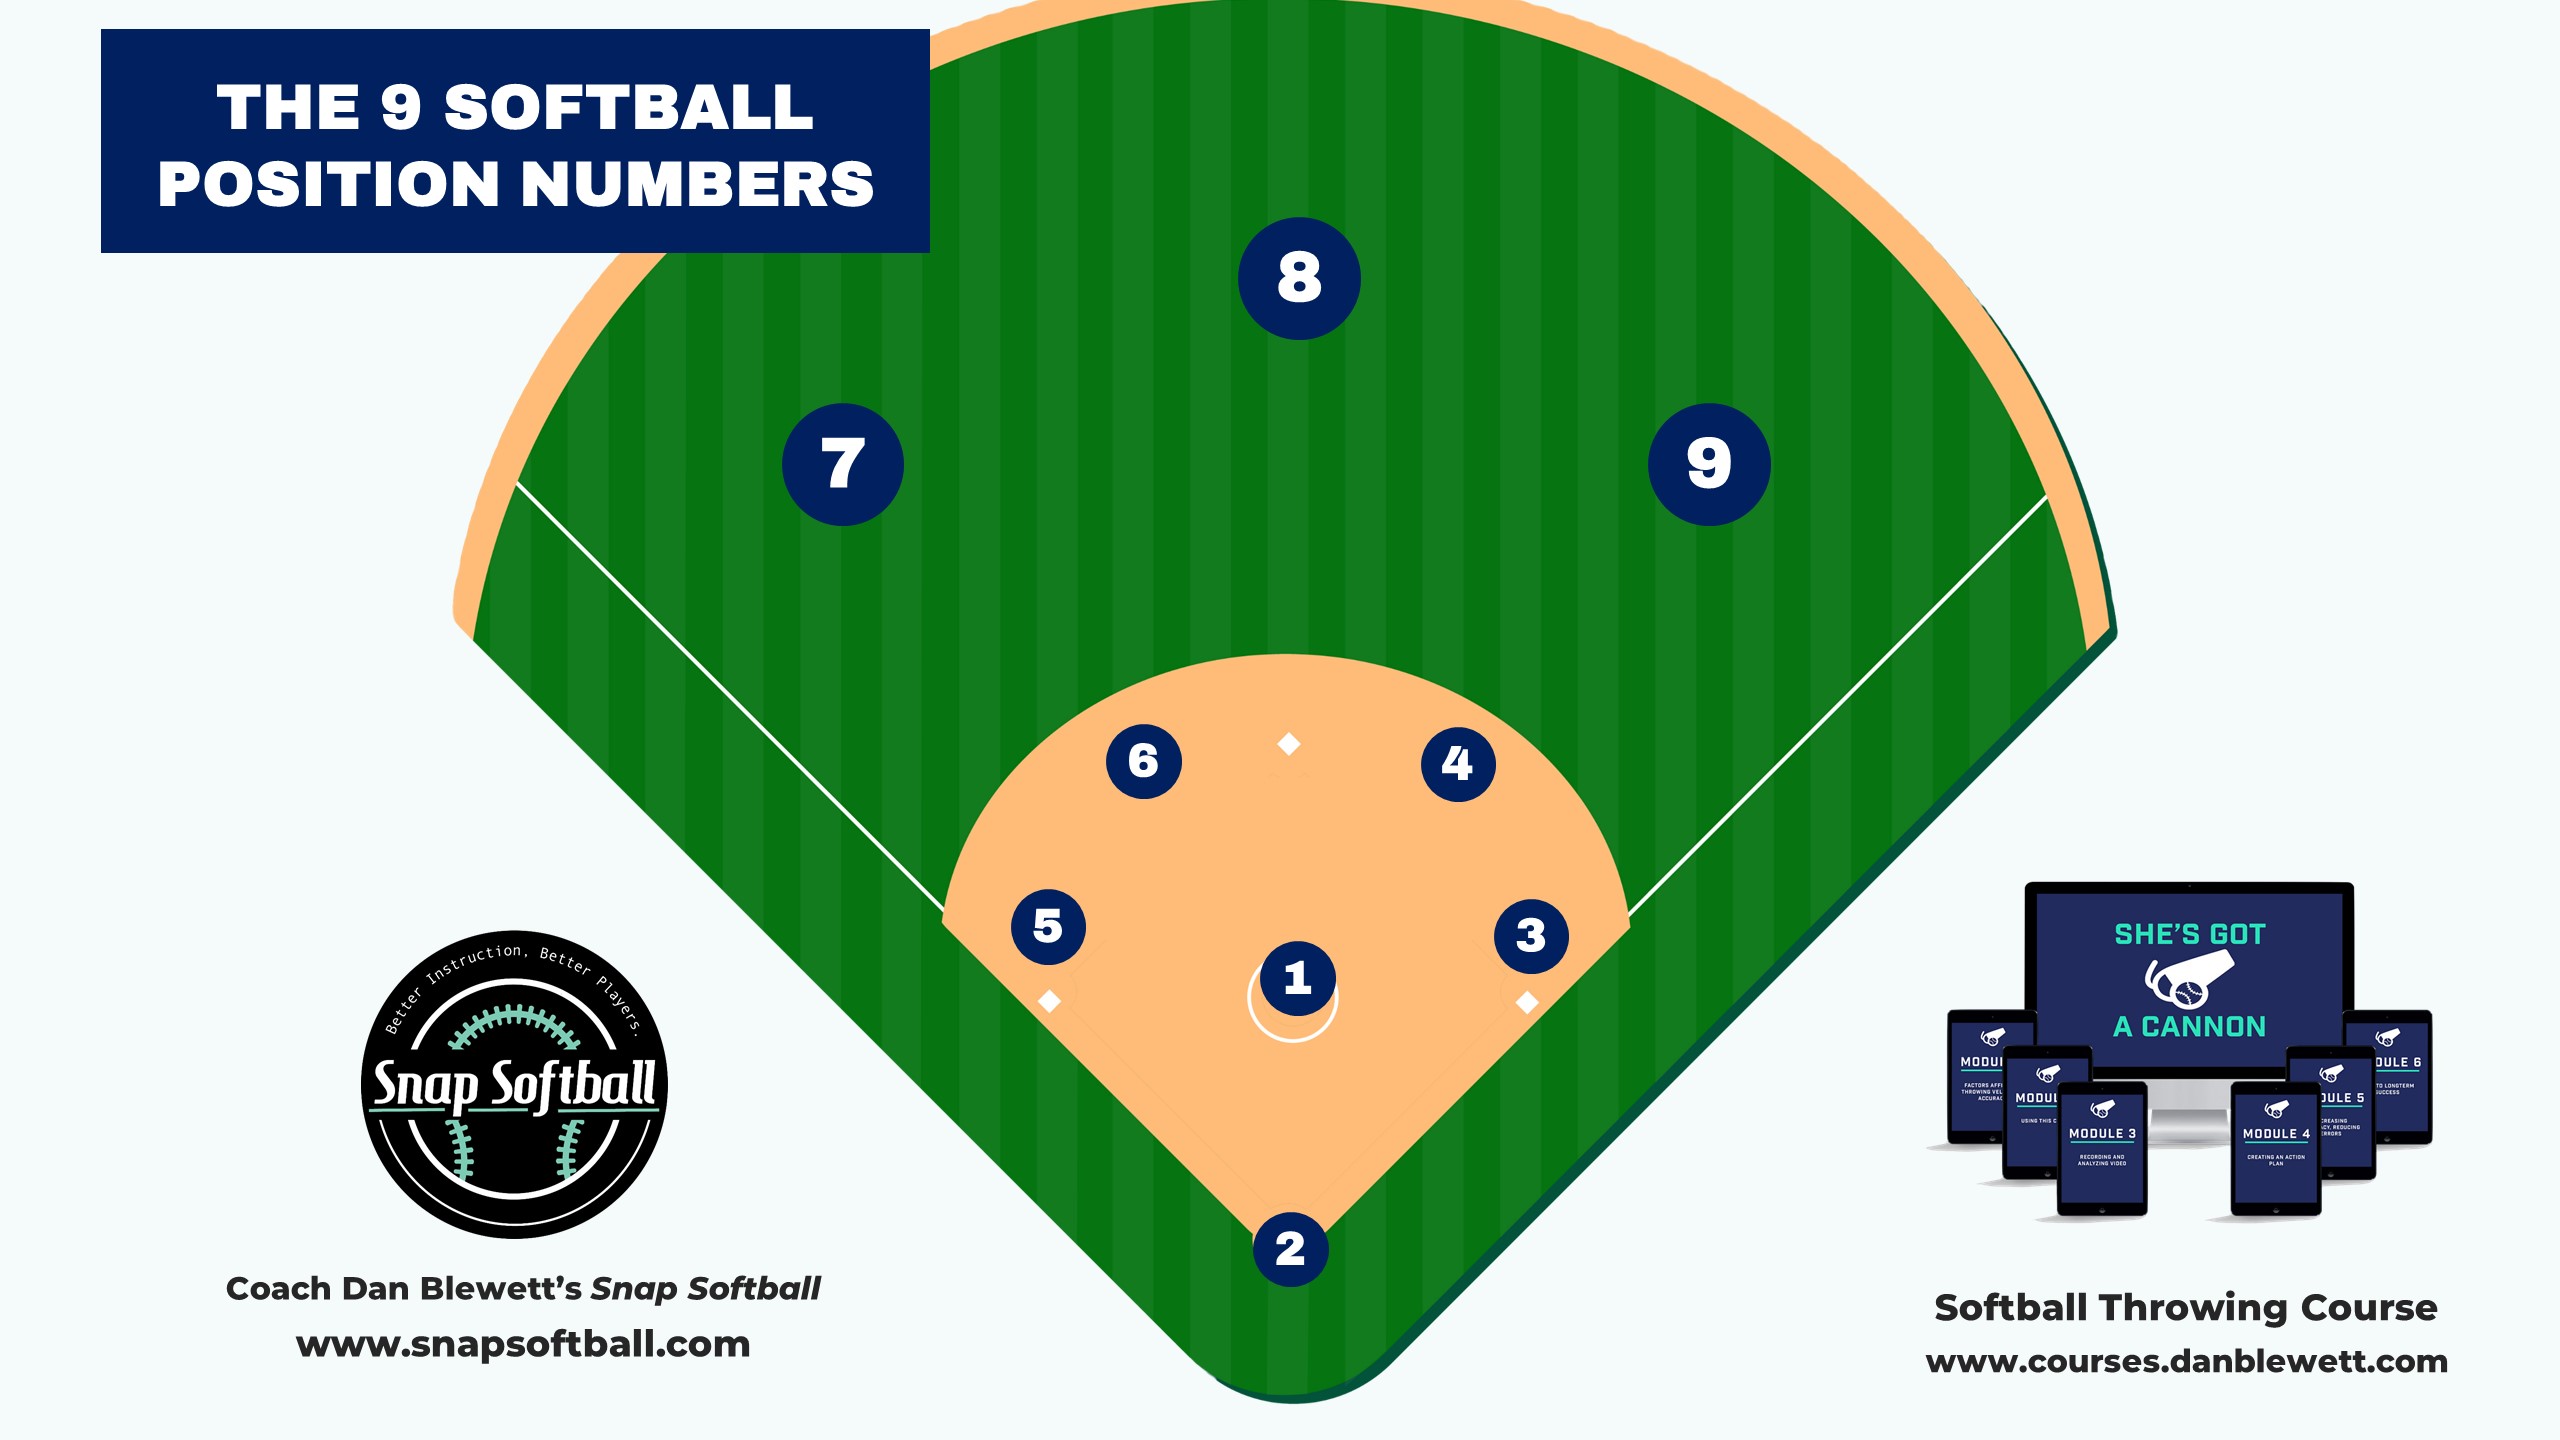 The 9 Softball Positions The Skills Required For Each One